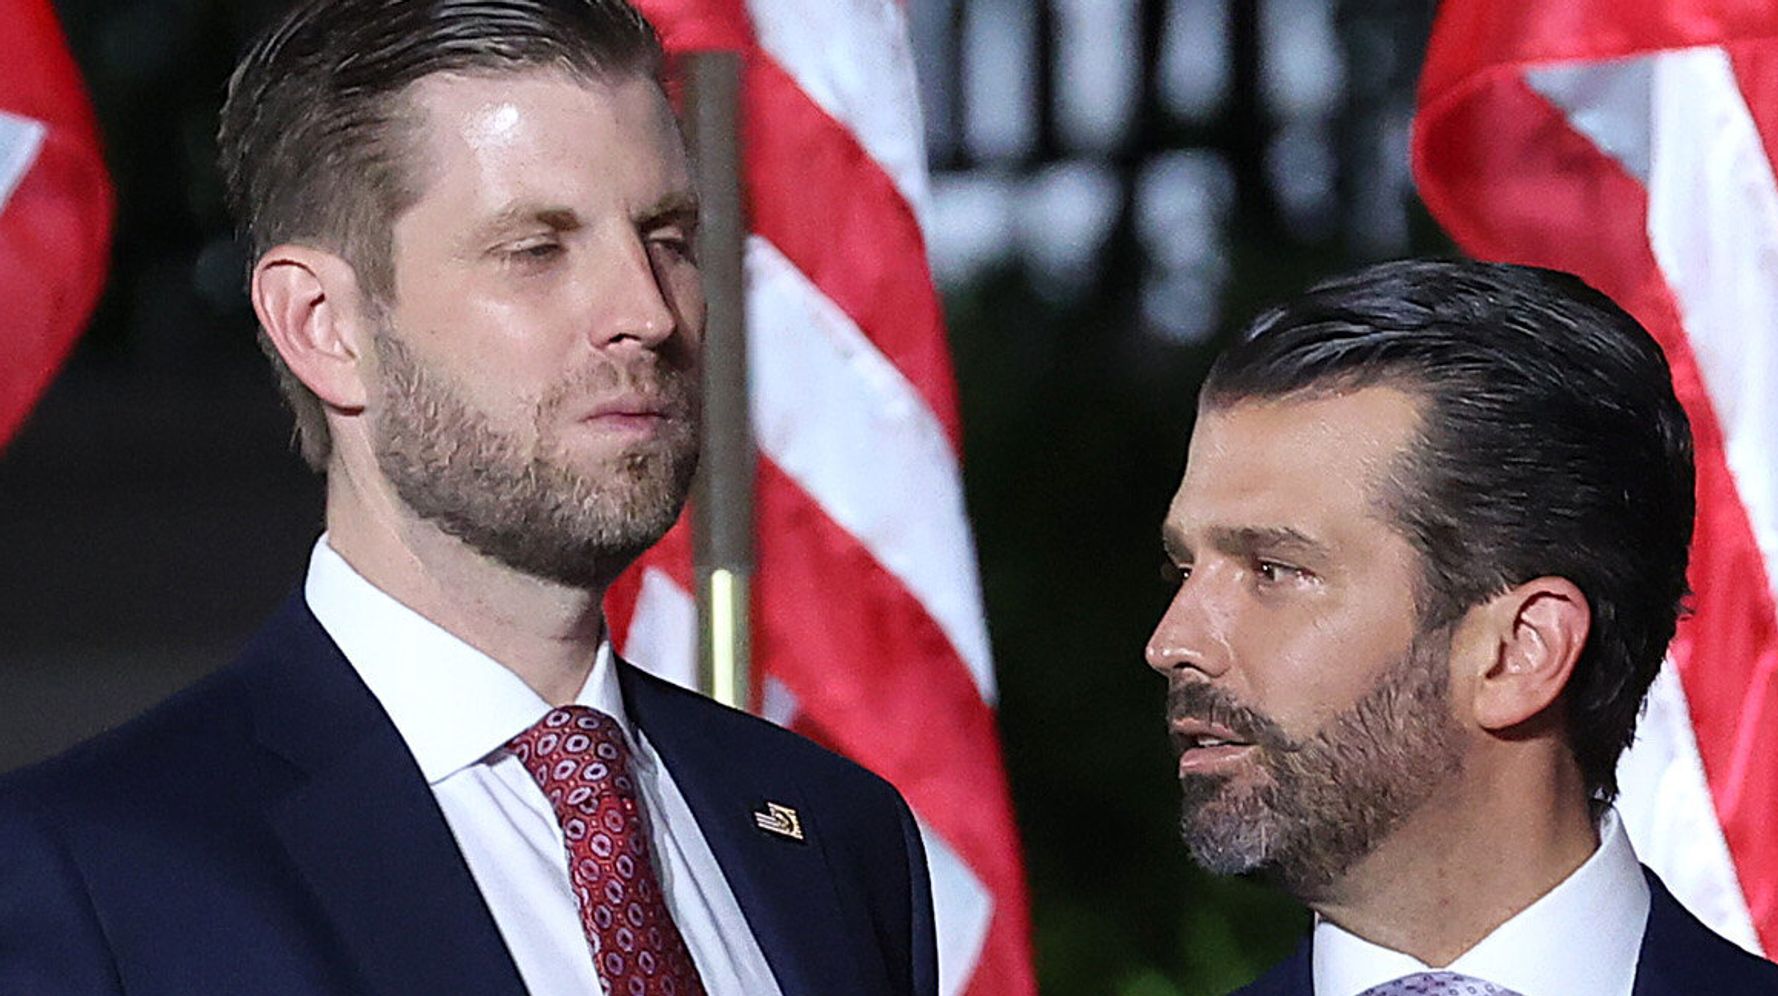 Eric Trump, Donald Trump Jr. Raise Eyebrows With Responses To Trump Org Charges